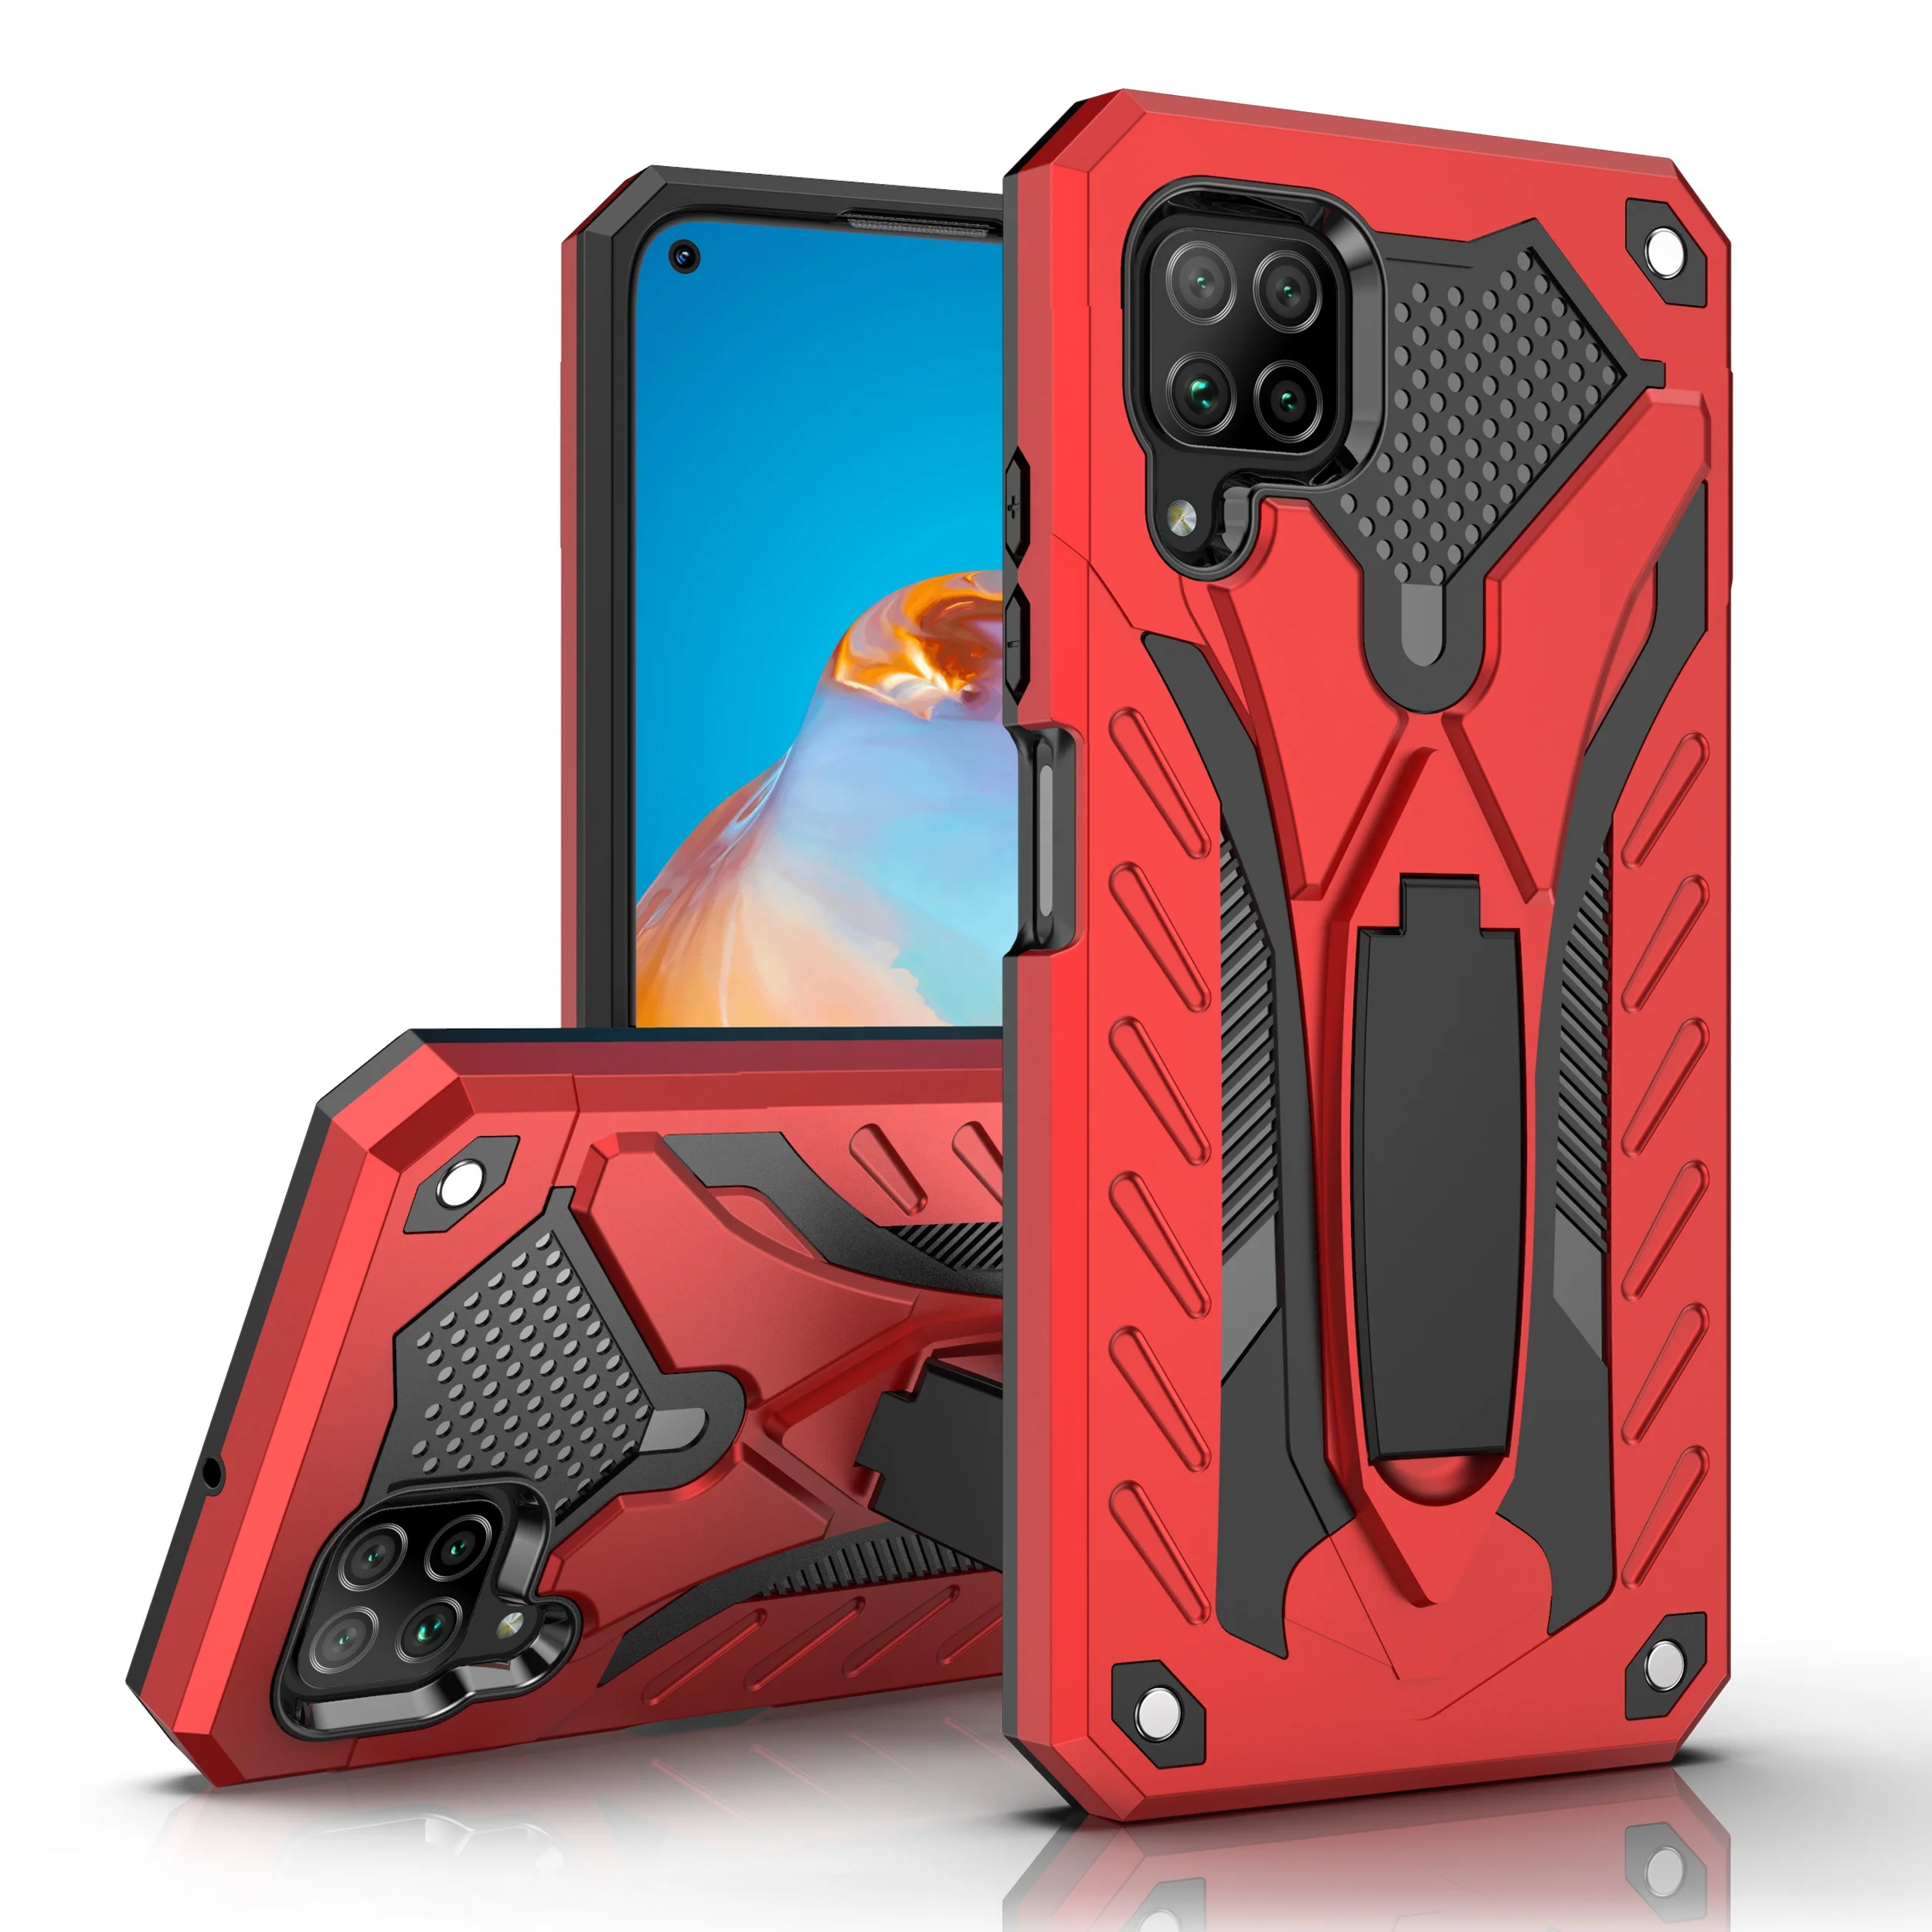 

ZHIKE New Arrivals Unique Style 2 in 1 TPU PC Smart Cell Phone Back Cover Armor Case for Huawei P40 Lite, Black, red, blue, silver, rose gold, luxury gold